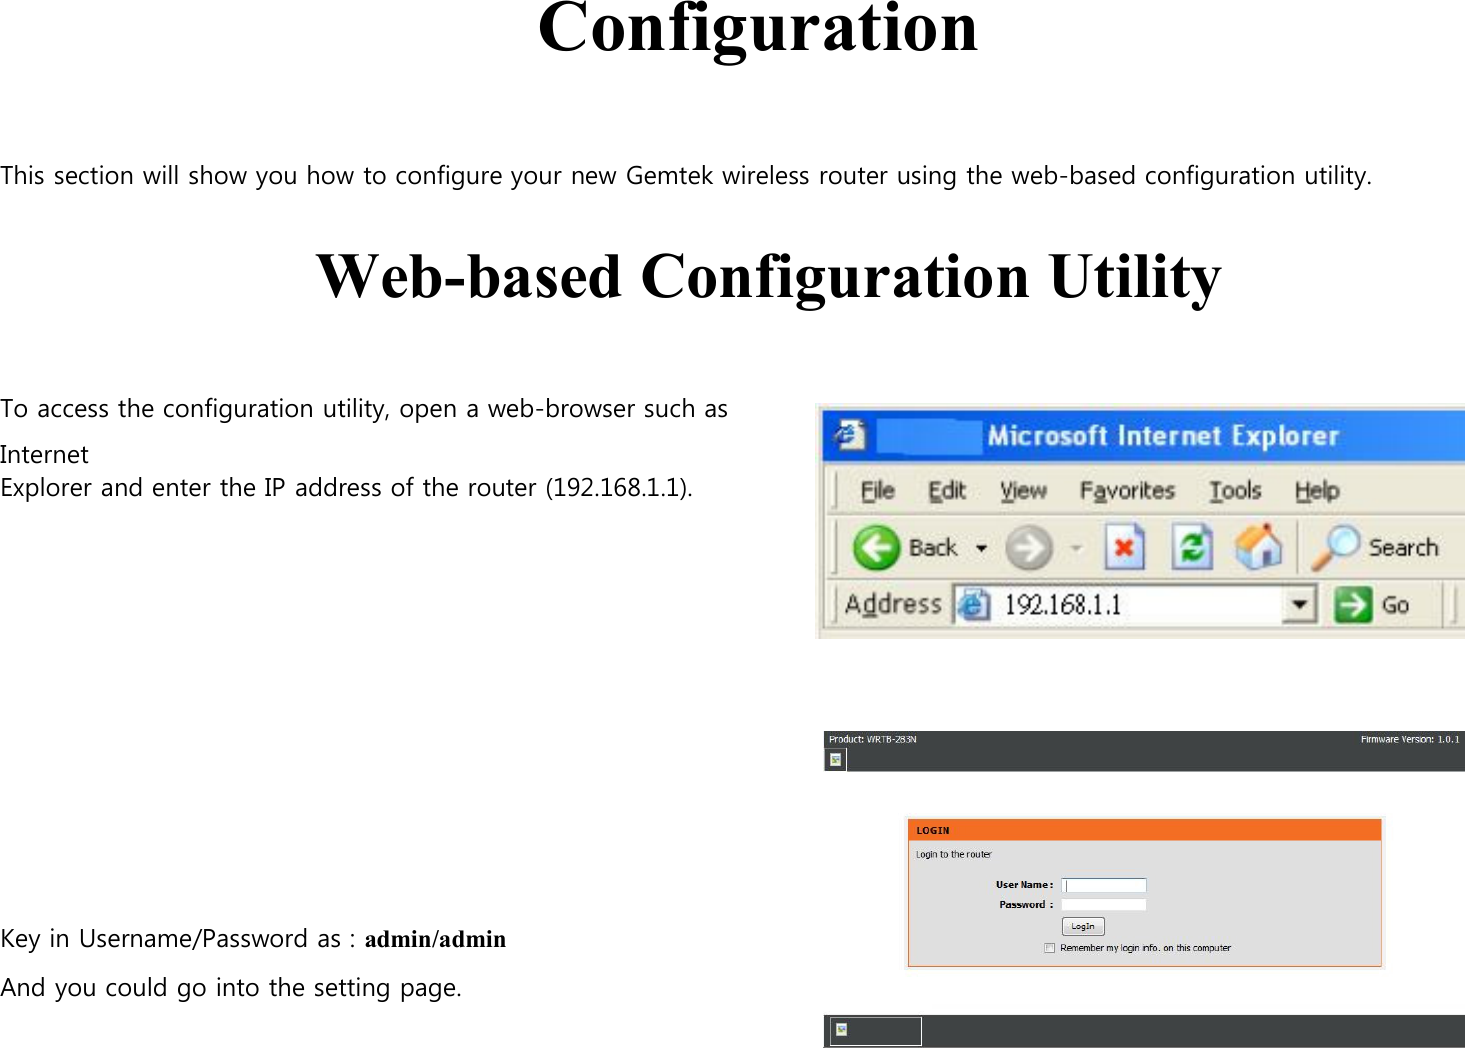     Configuration  This section will show you how to configure your new Gemtek wireless router using the web-based configuration utility.   Web-based Configuration Utility    To access the configuration utility, open a web-browser such as Internet Explorer and enter the IP address of the router (192.168.1.1).               Key in Username/Password as : admin/admin    And you could go into the setting page.                                    